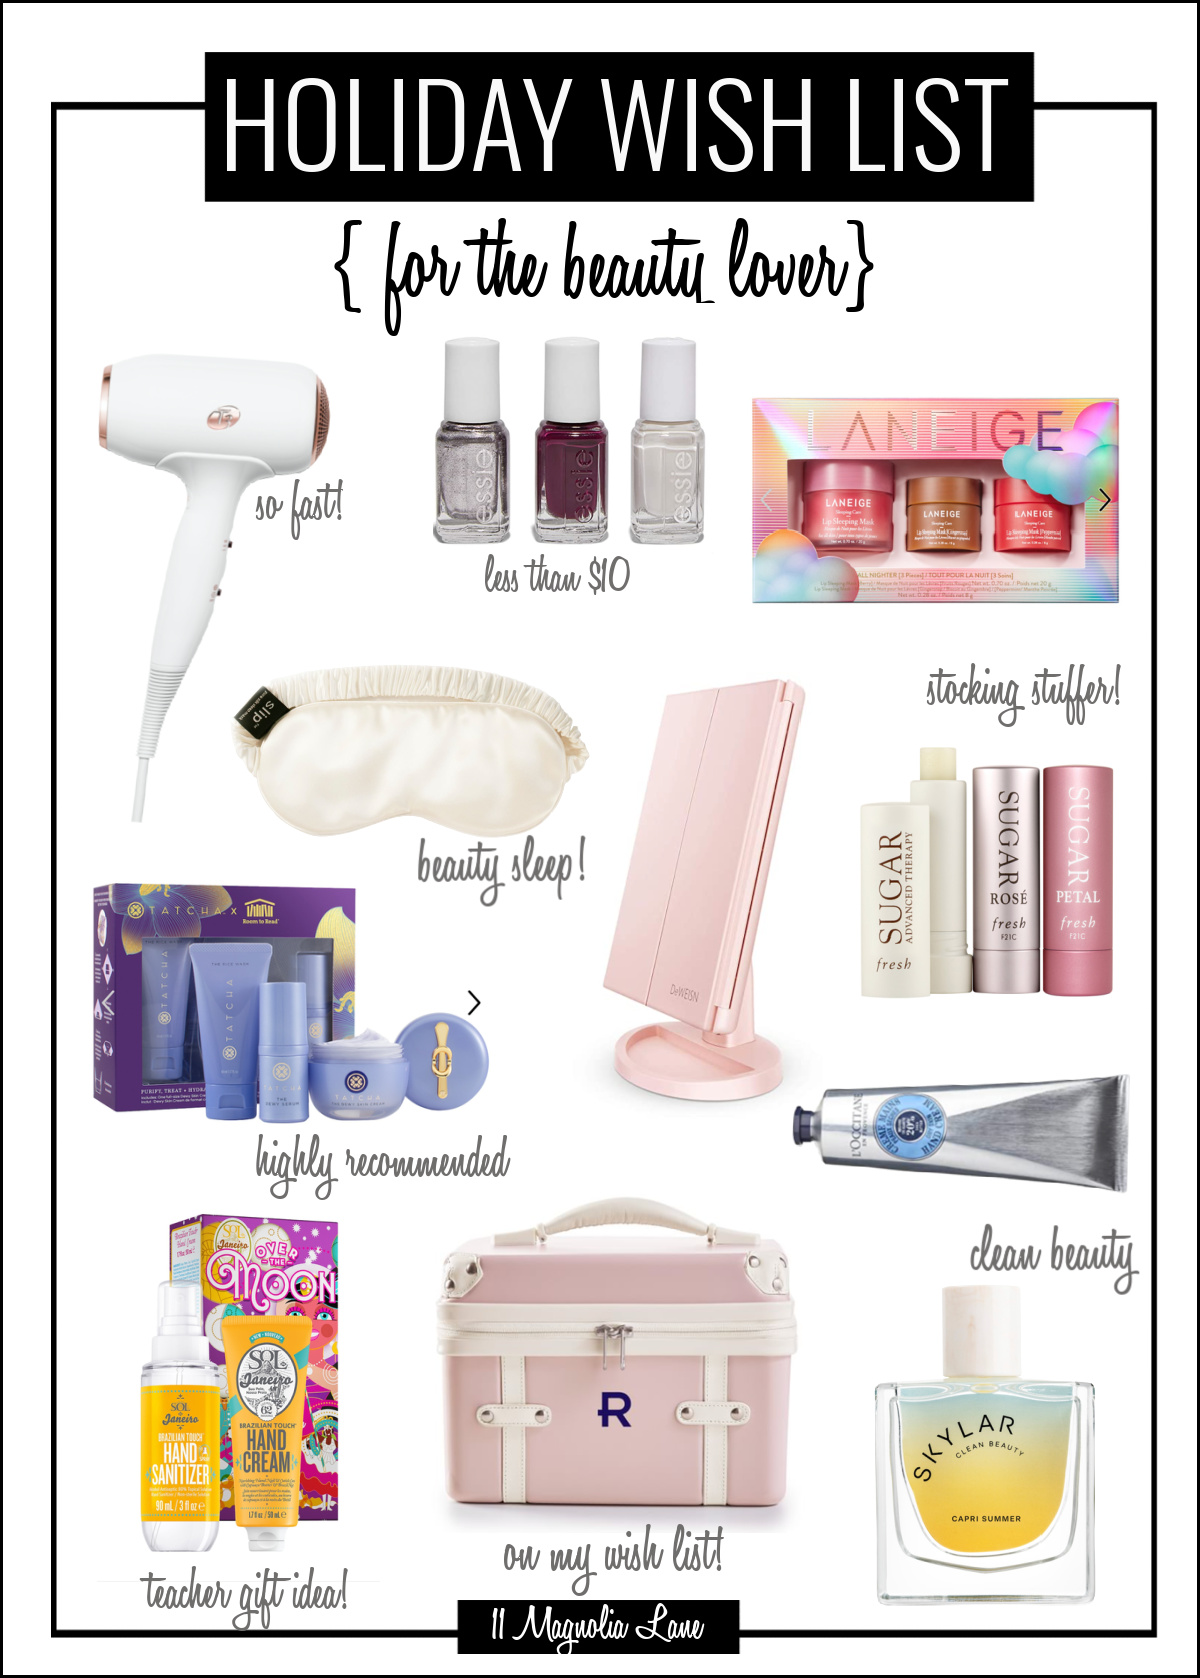 2023 Holiday Gift Guides: Gifts for Her - The Small Things Blog